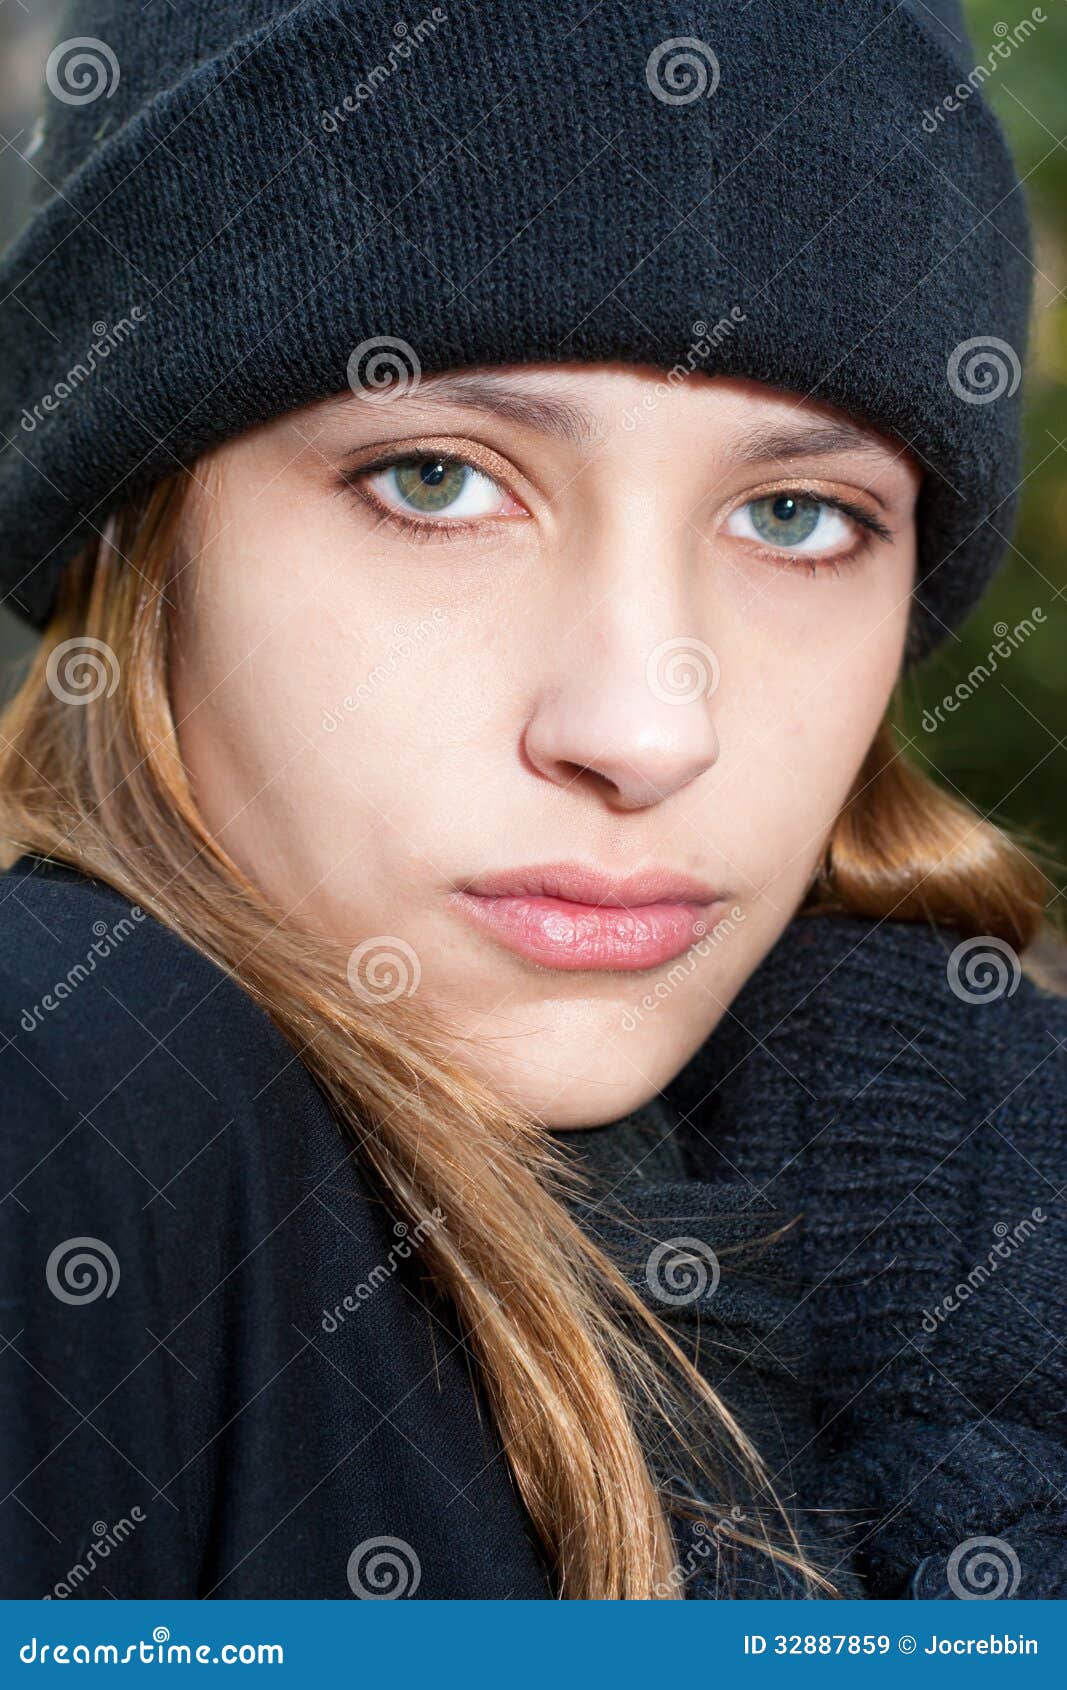 Teenage Girl Wearing Winter Mittens, Scarf and Hat Stock Image - Image ...